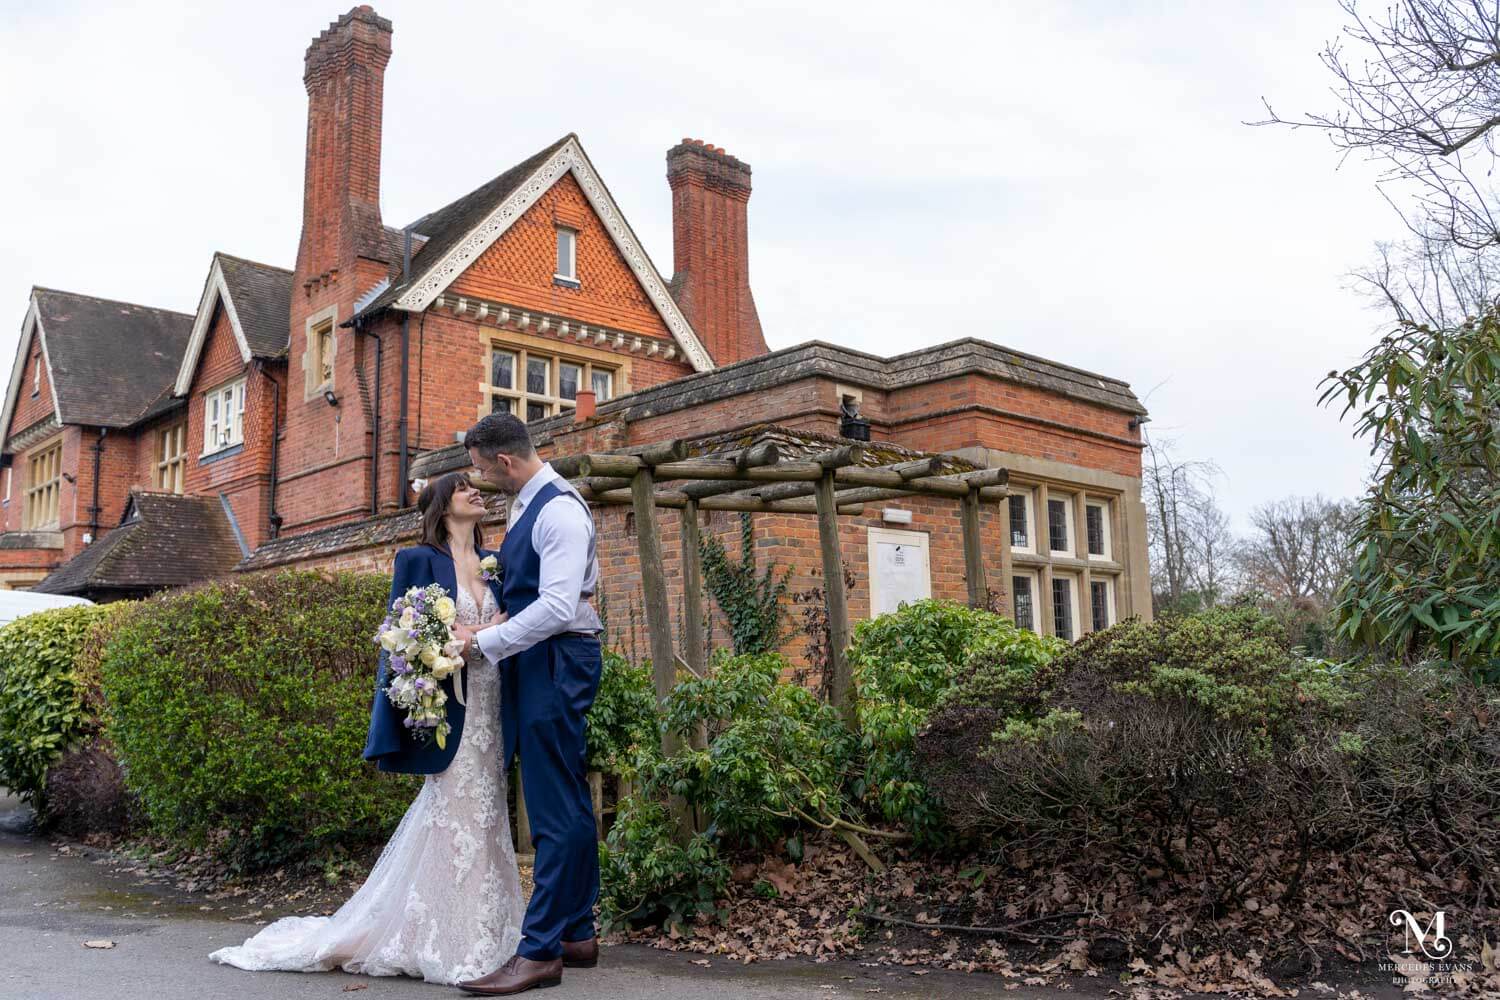 The bride and groom stand together in front of Cantley House